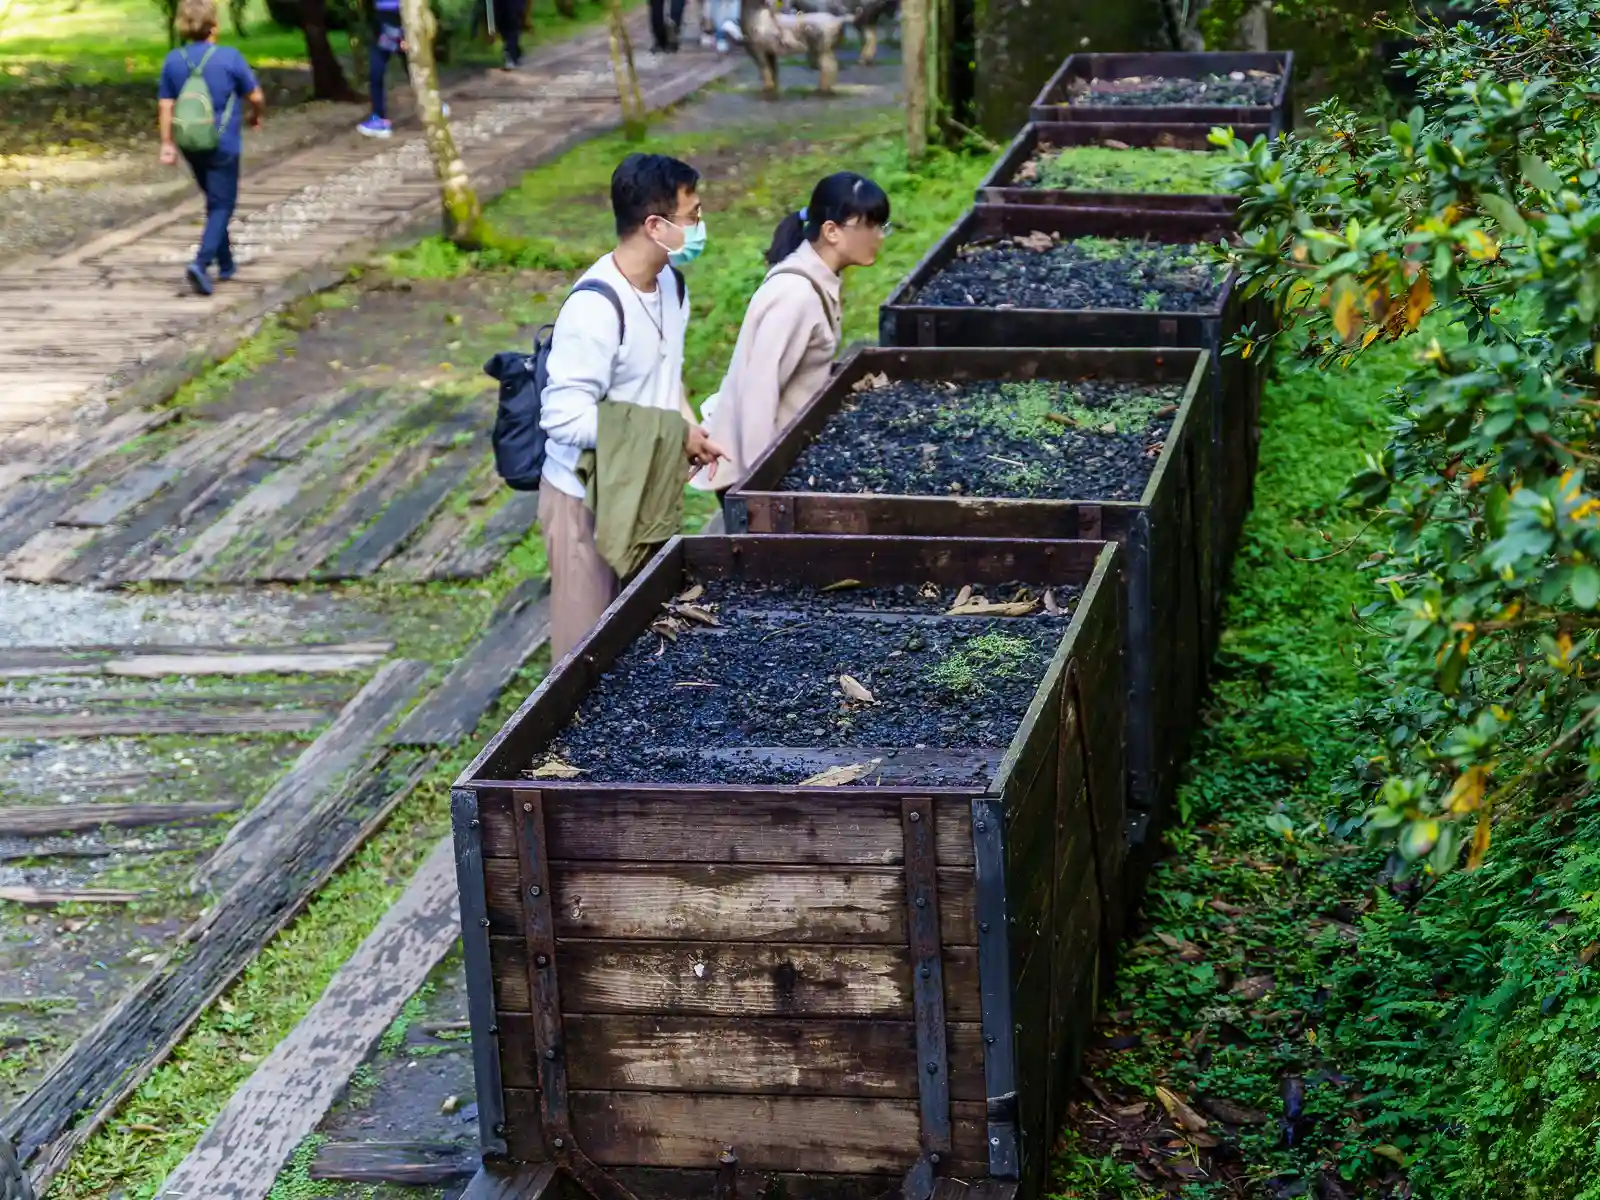 Tourists take a look at wagons once used for transporting coal.